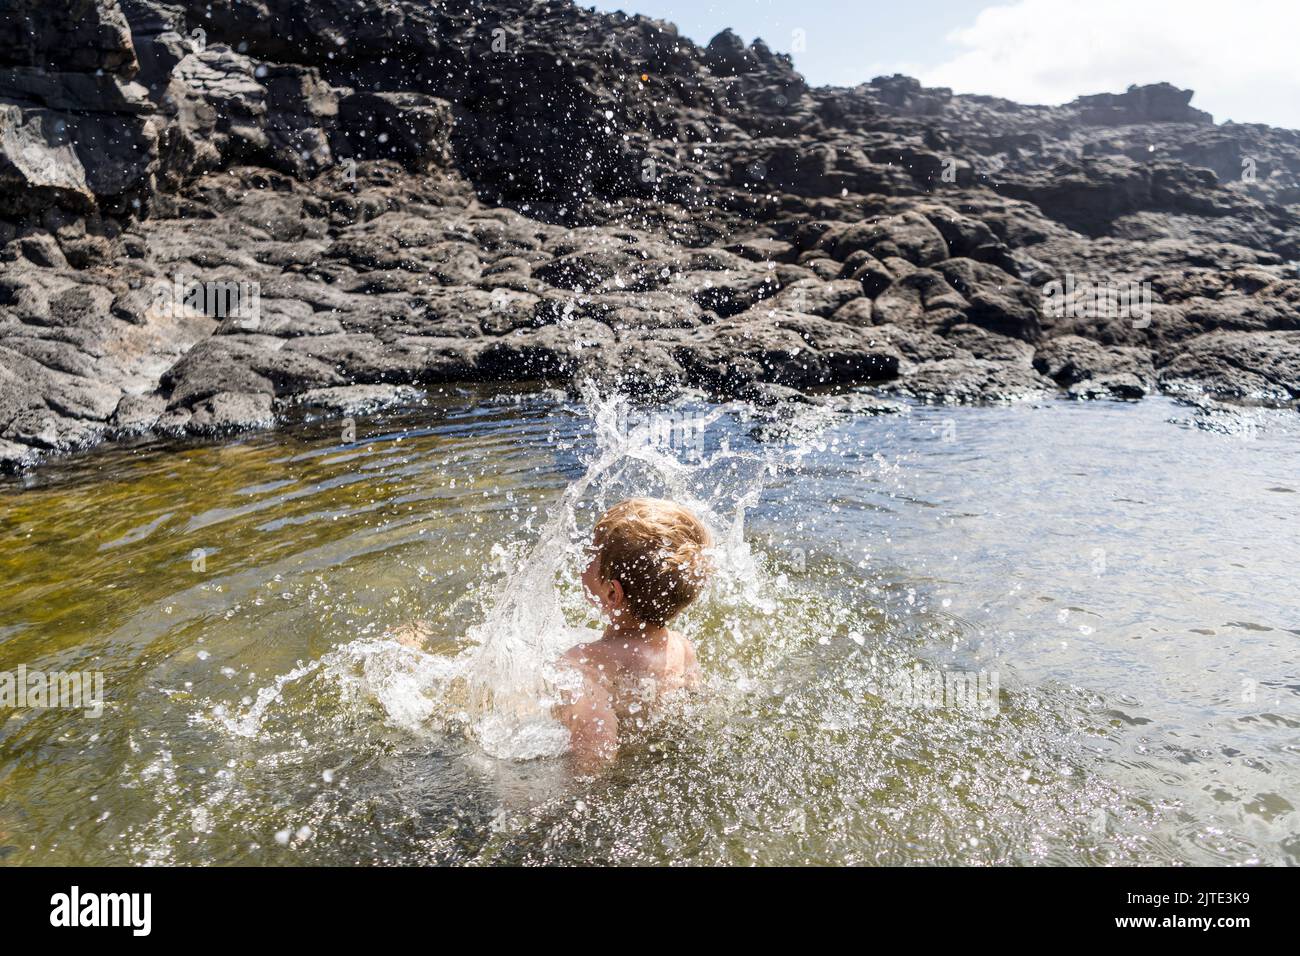 Small boy cheerfully jumping in Charcones natural pools in Lanzarote, Canary Islands, Spain Stock Photo